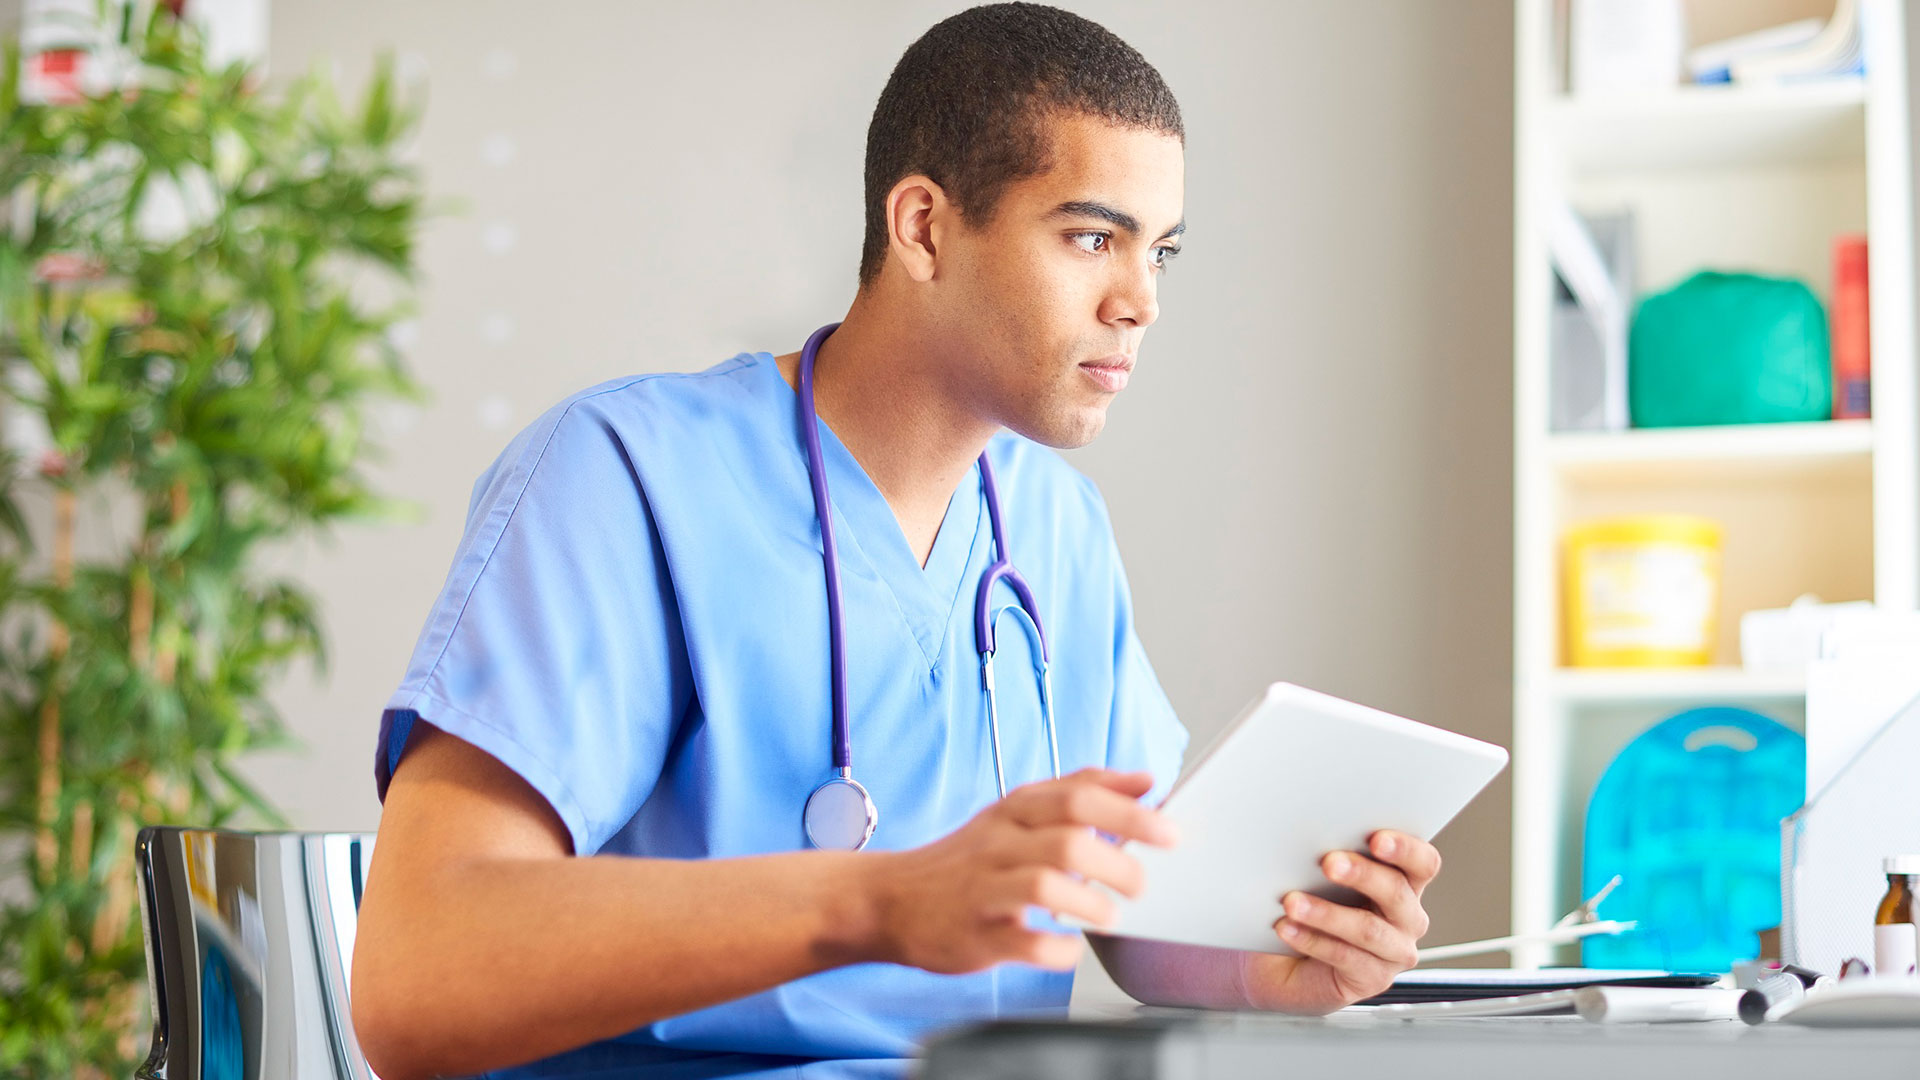 A medical student wearing scrubs. They are sat a desk whilst holding an iPad.